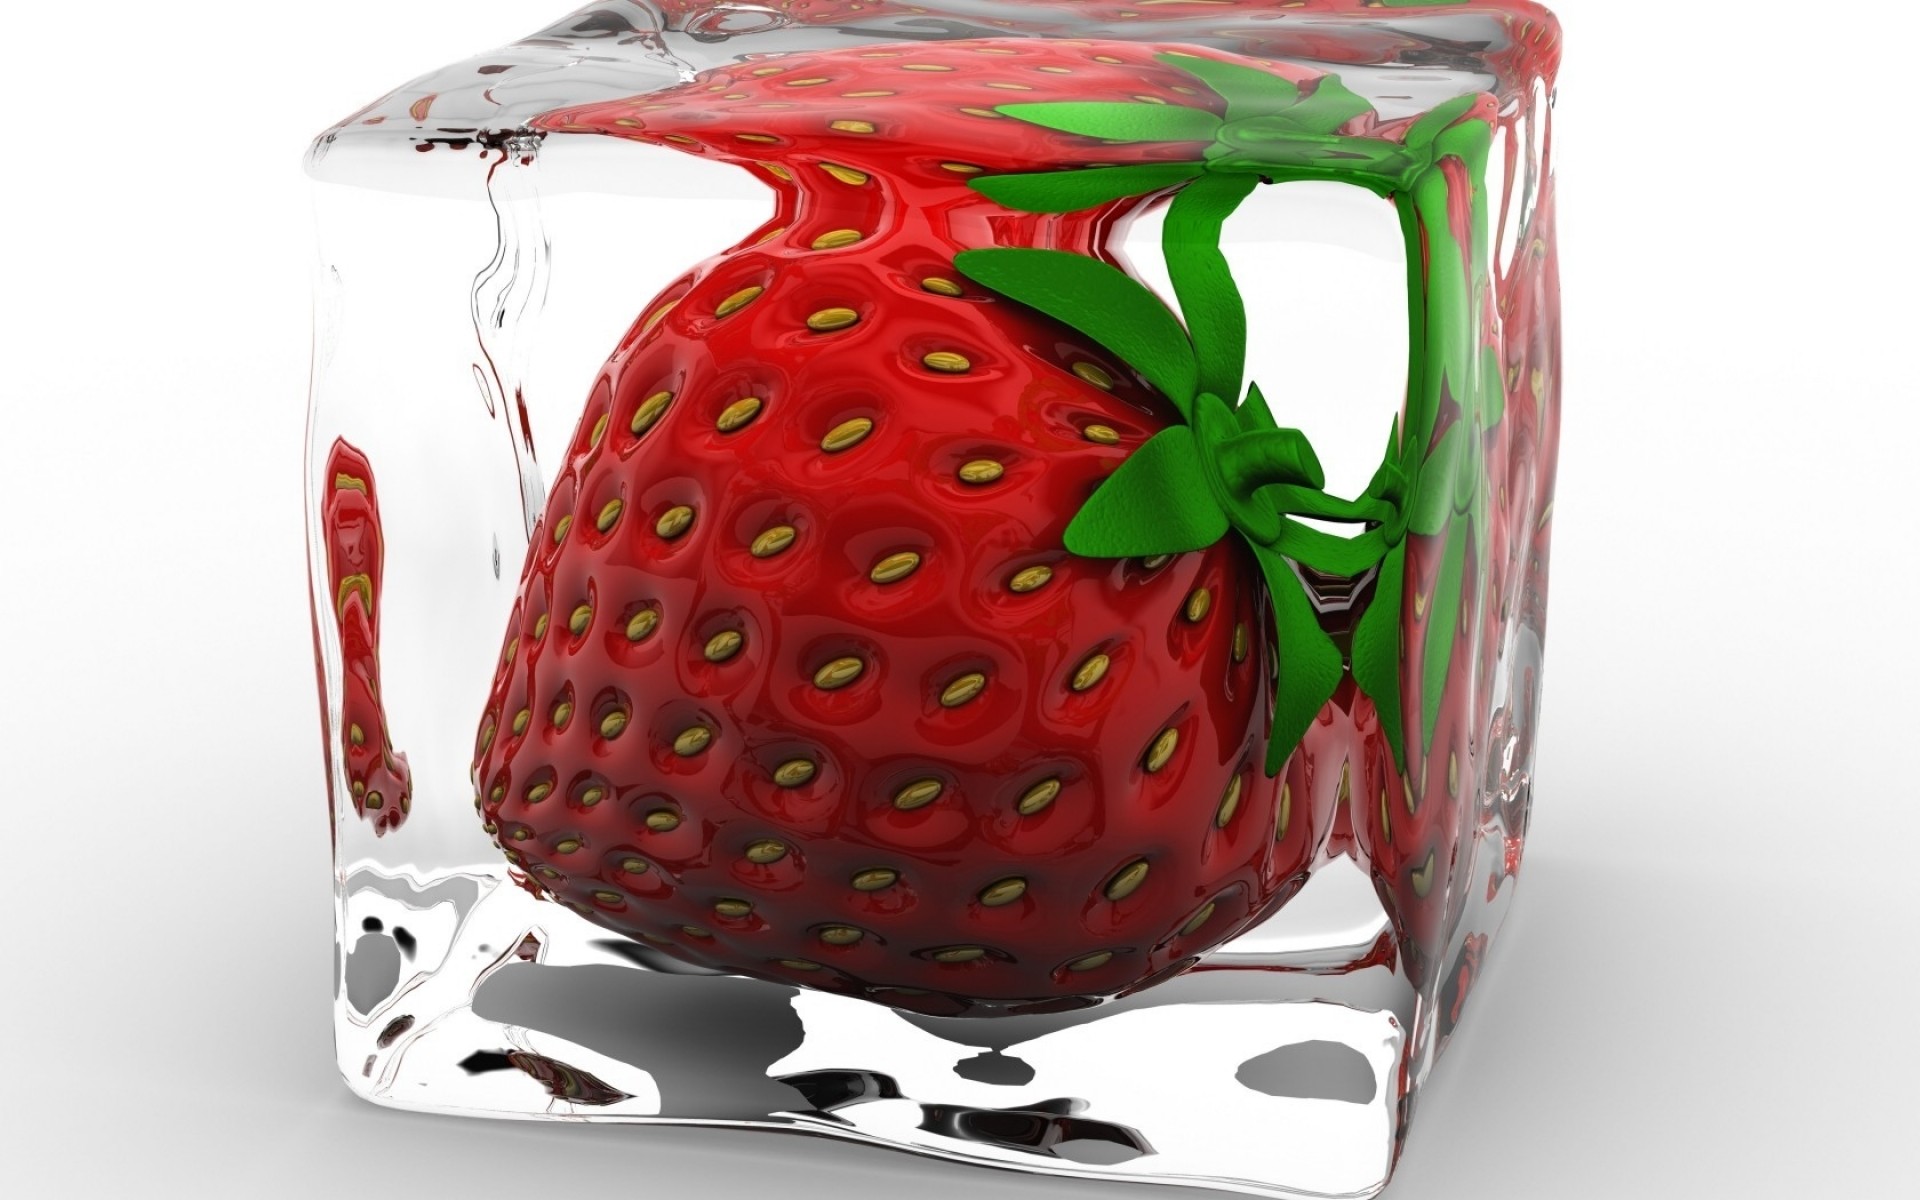 1920x1200 Strawberry Ice Cube wallpapers and stock photos